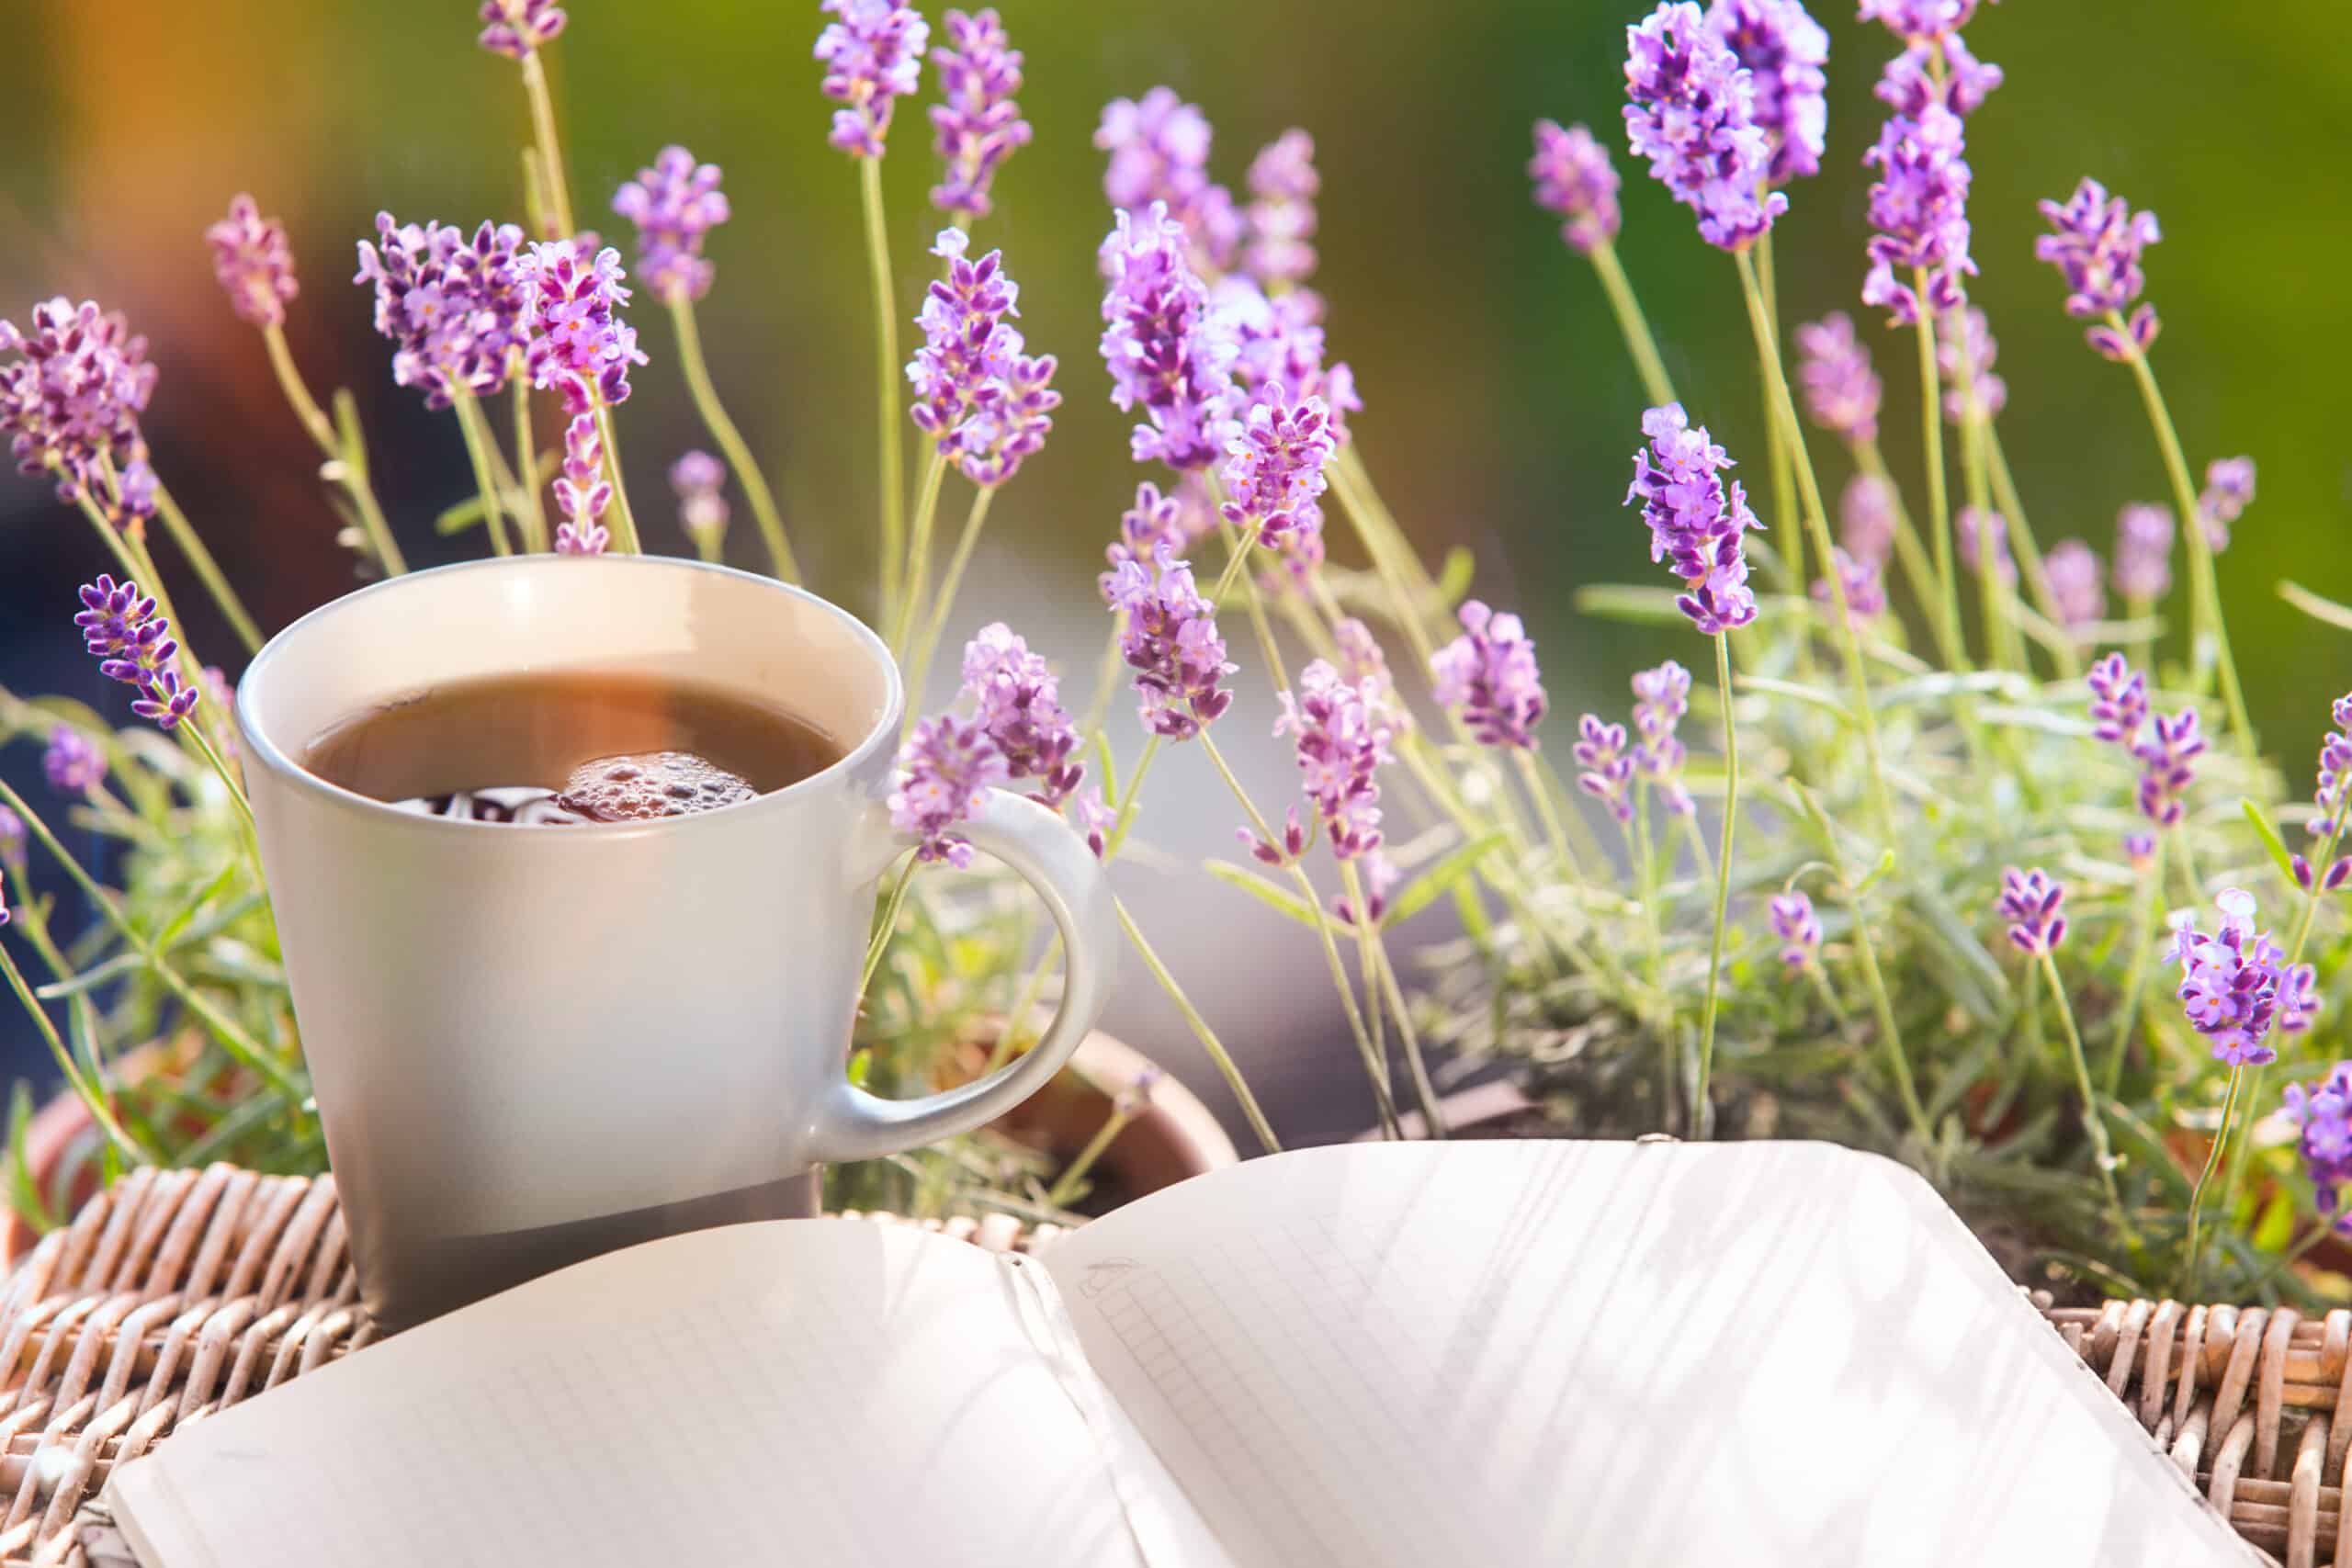 Open blank notebook, a cup of tea or coffee and lavender flowers in the field.